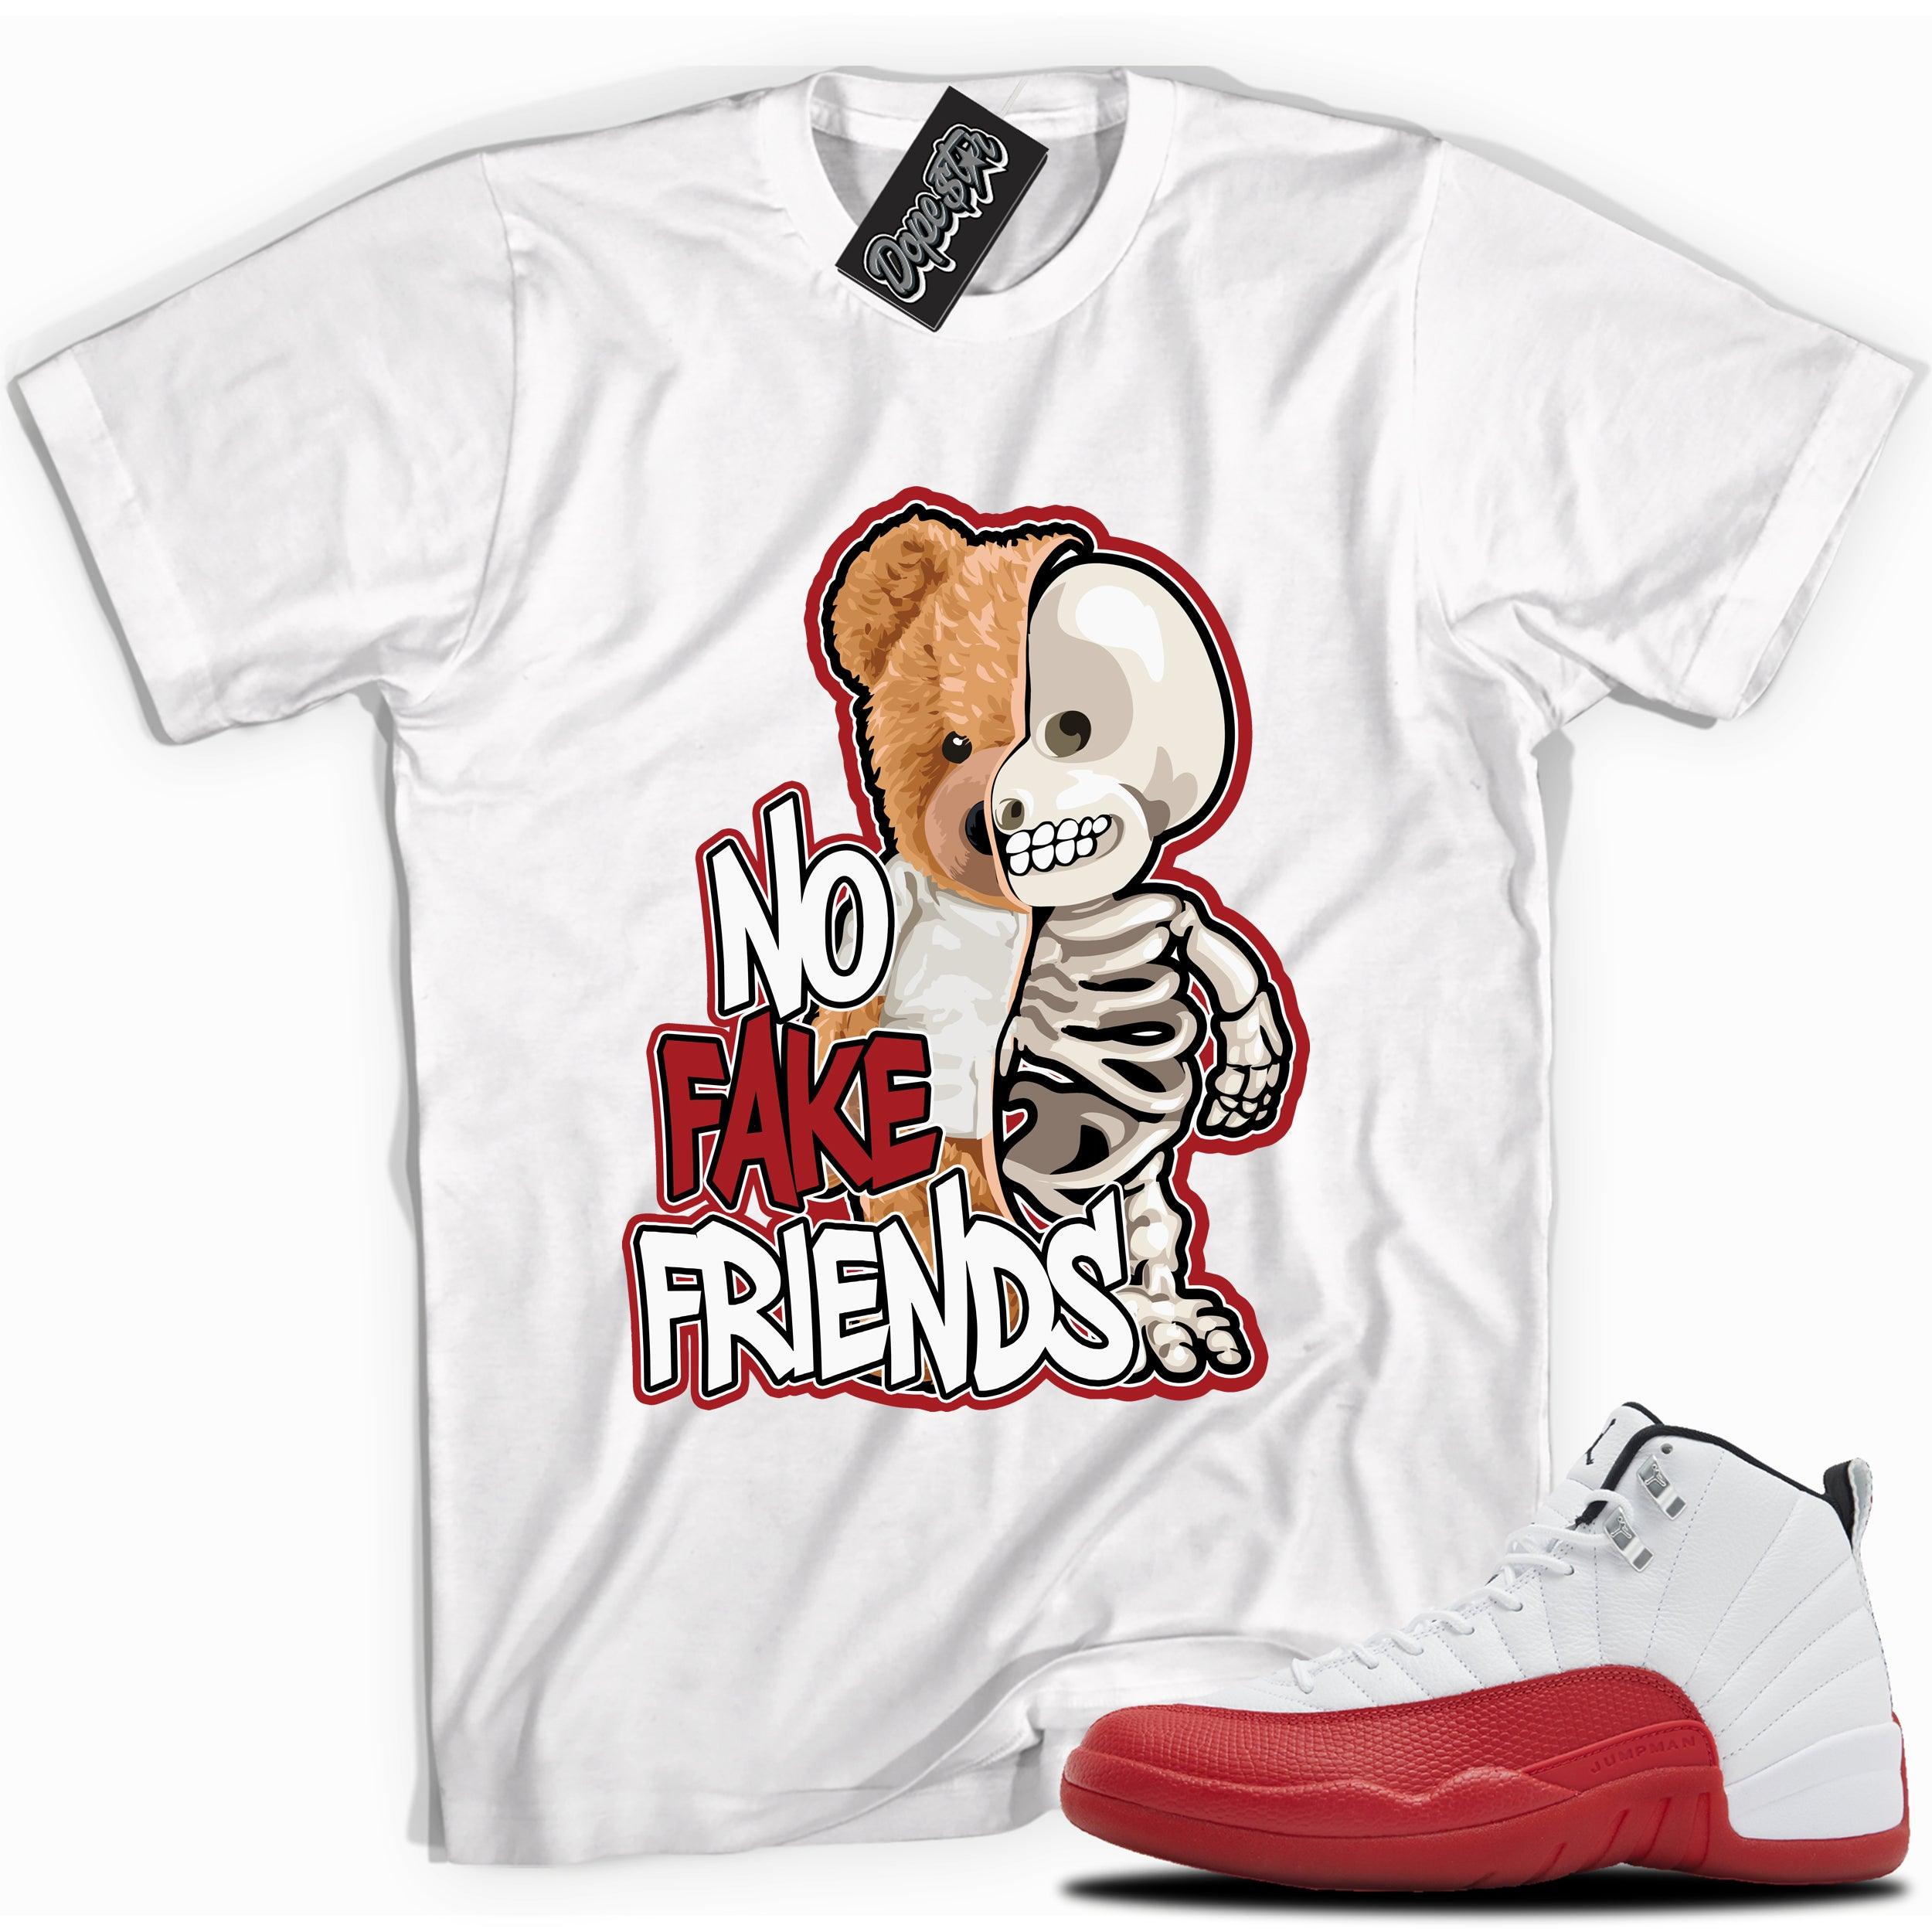 Cool White graphic tee with “NO FAKE FRIENDS” print, that perfectly matches Air Jordan 12 Retro Cherry Red 2023 red and white sneakers 